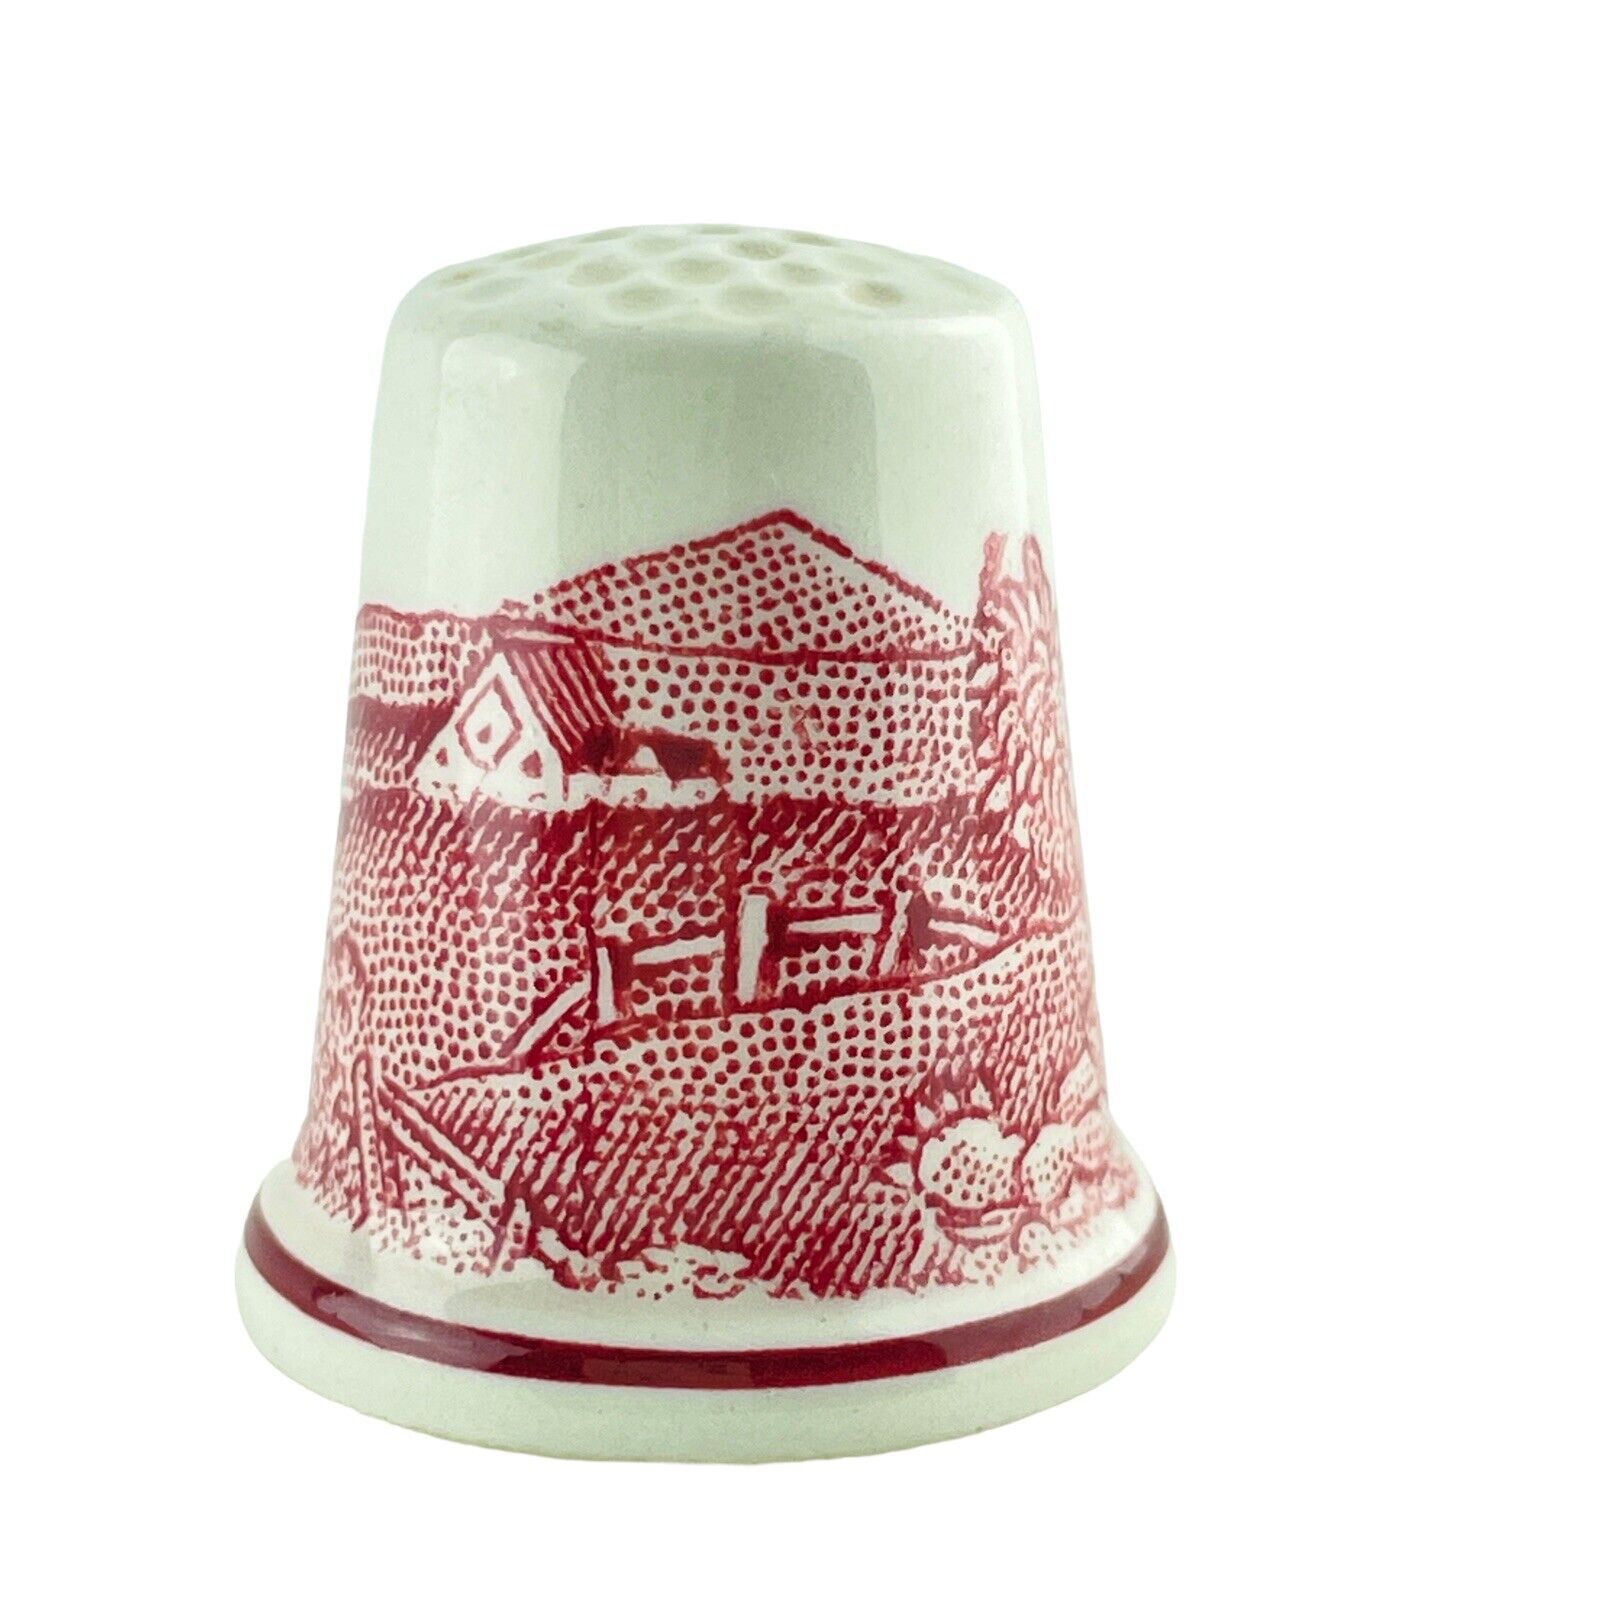 Thimble Sewing J Adams White Porcelain Country Farm Scene in Red